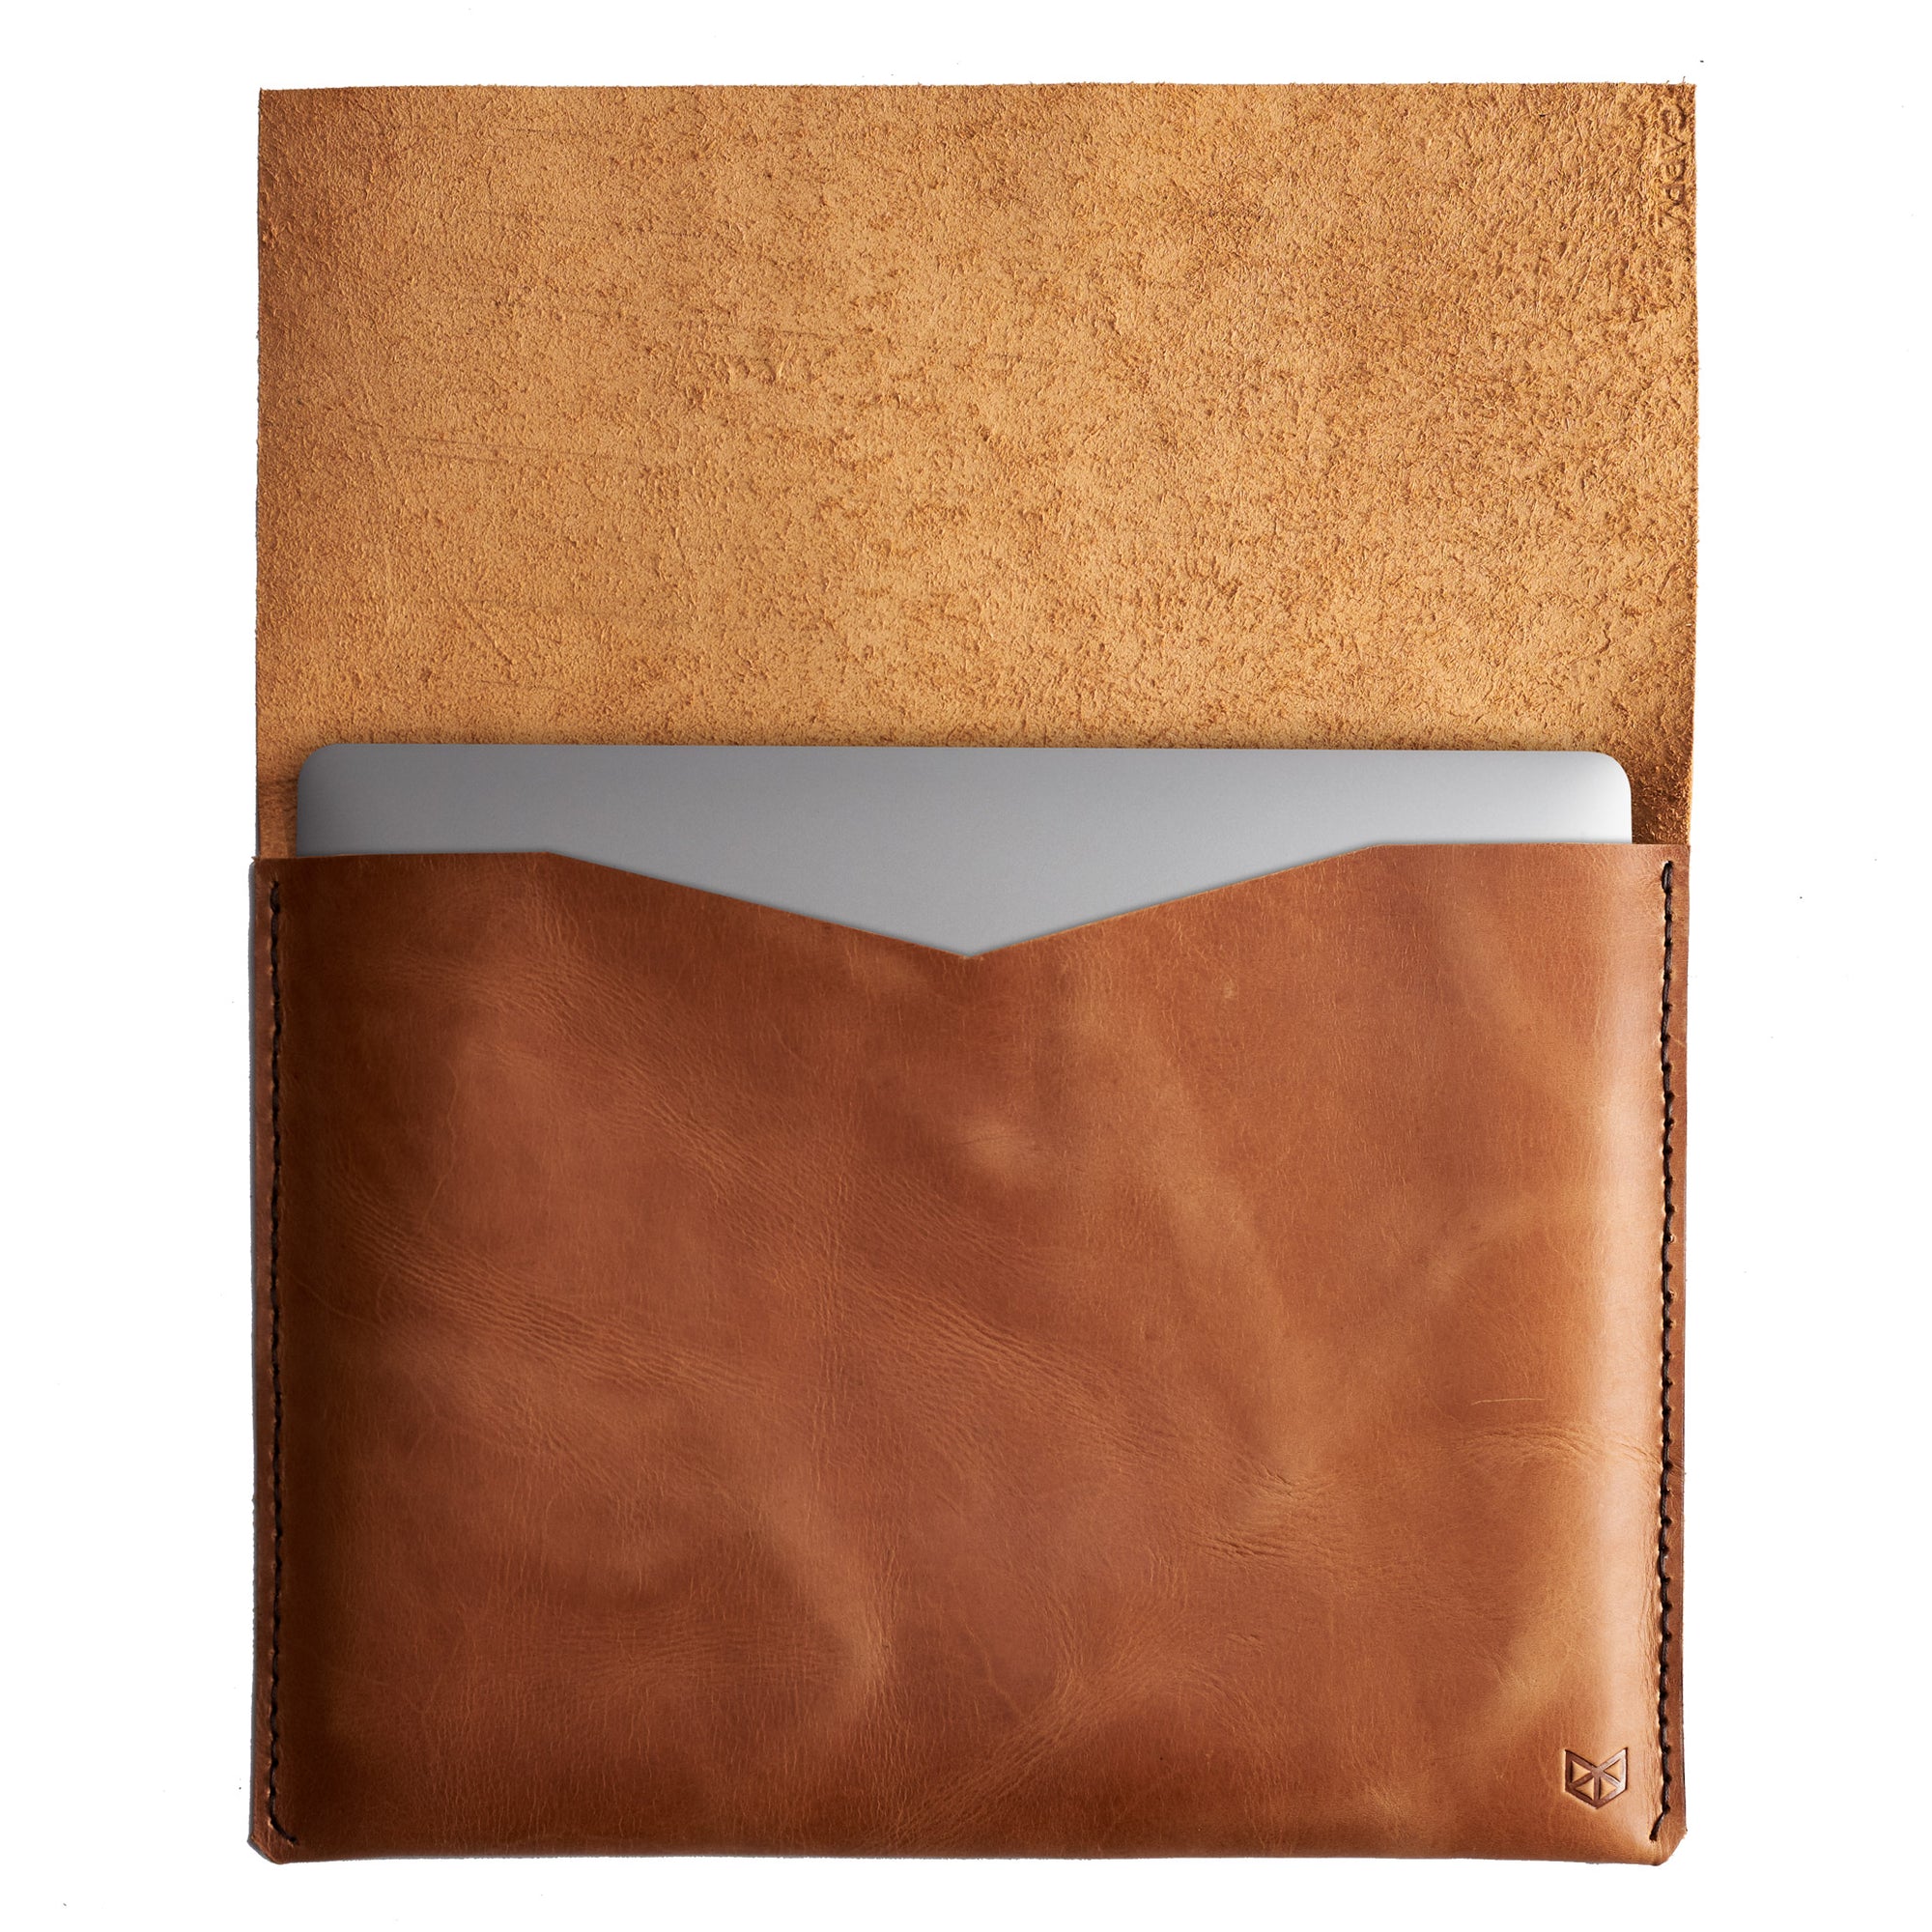 Soft interior folio. Leather Microsoft Surface  Sleeve Case by Capra Leather